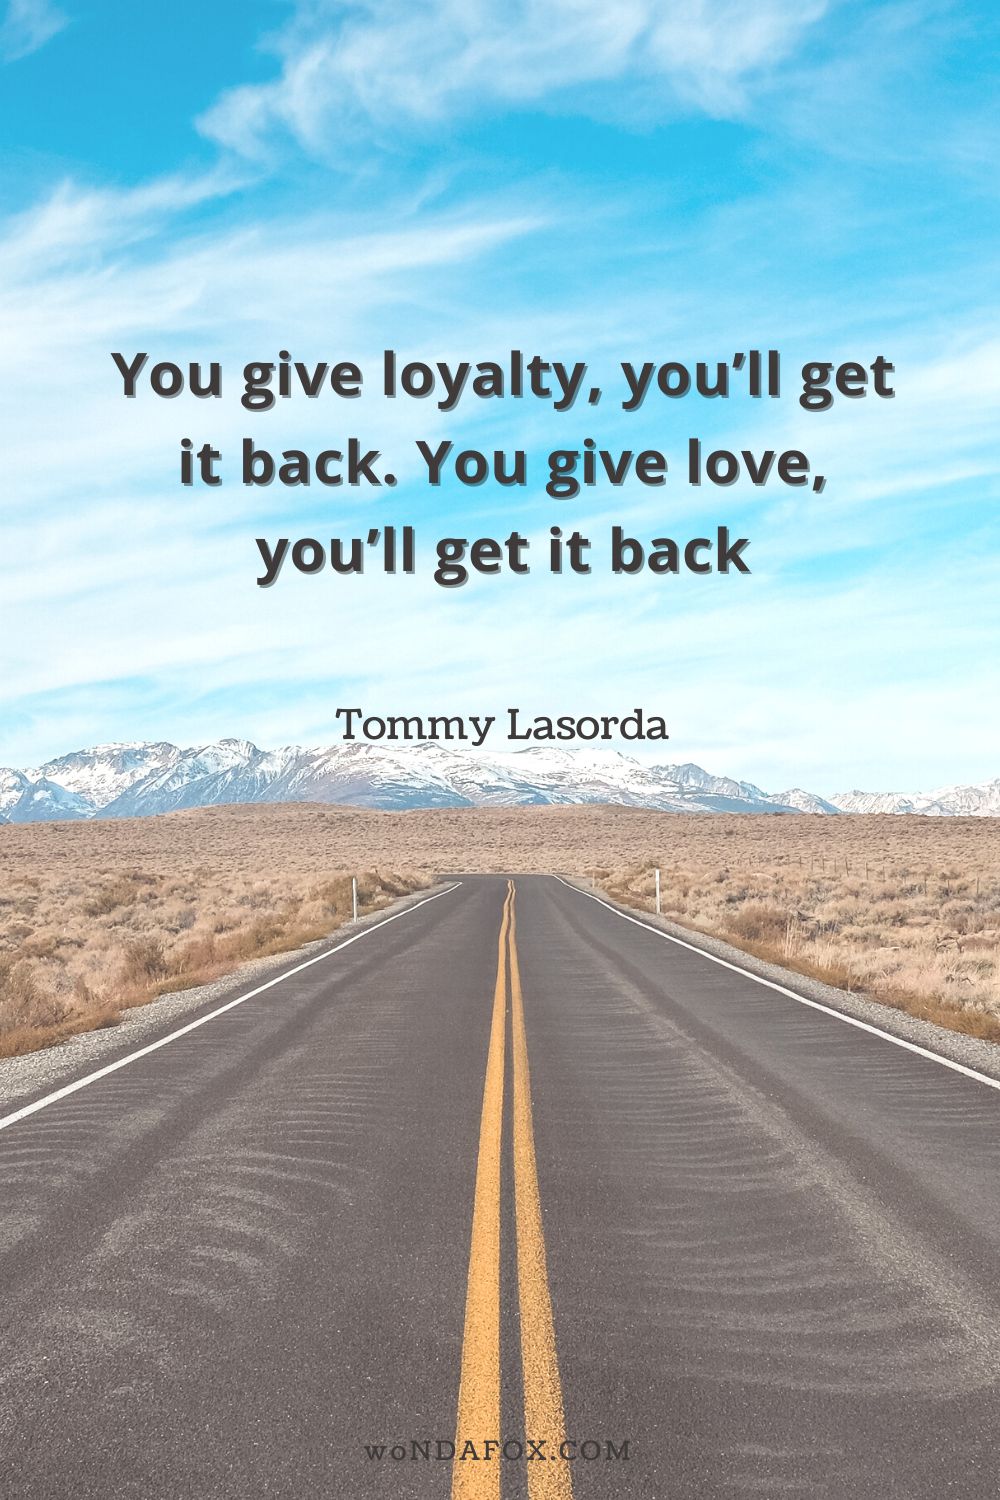 “You give loyalty, you’ll get it back. You give love, you’ll get it back.” 